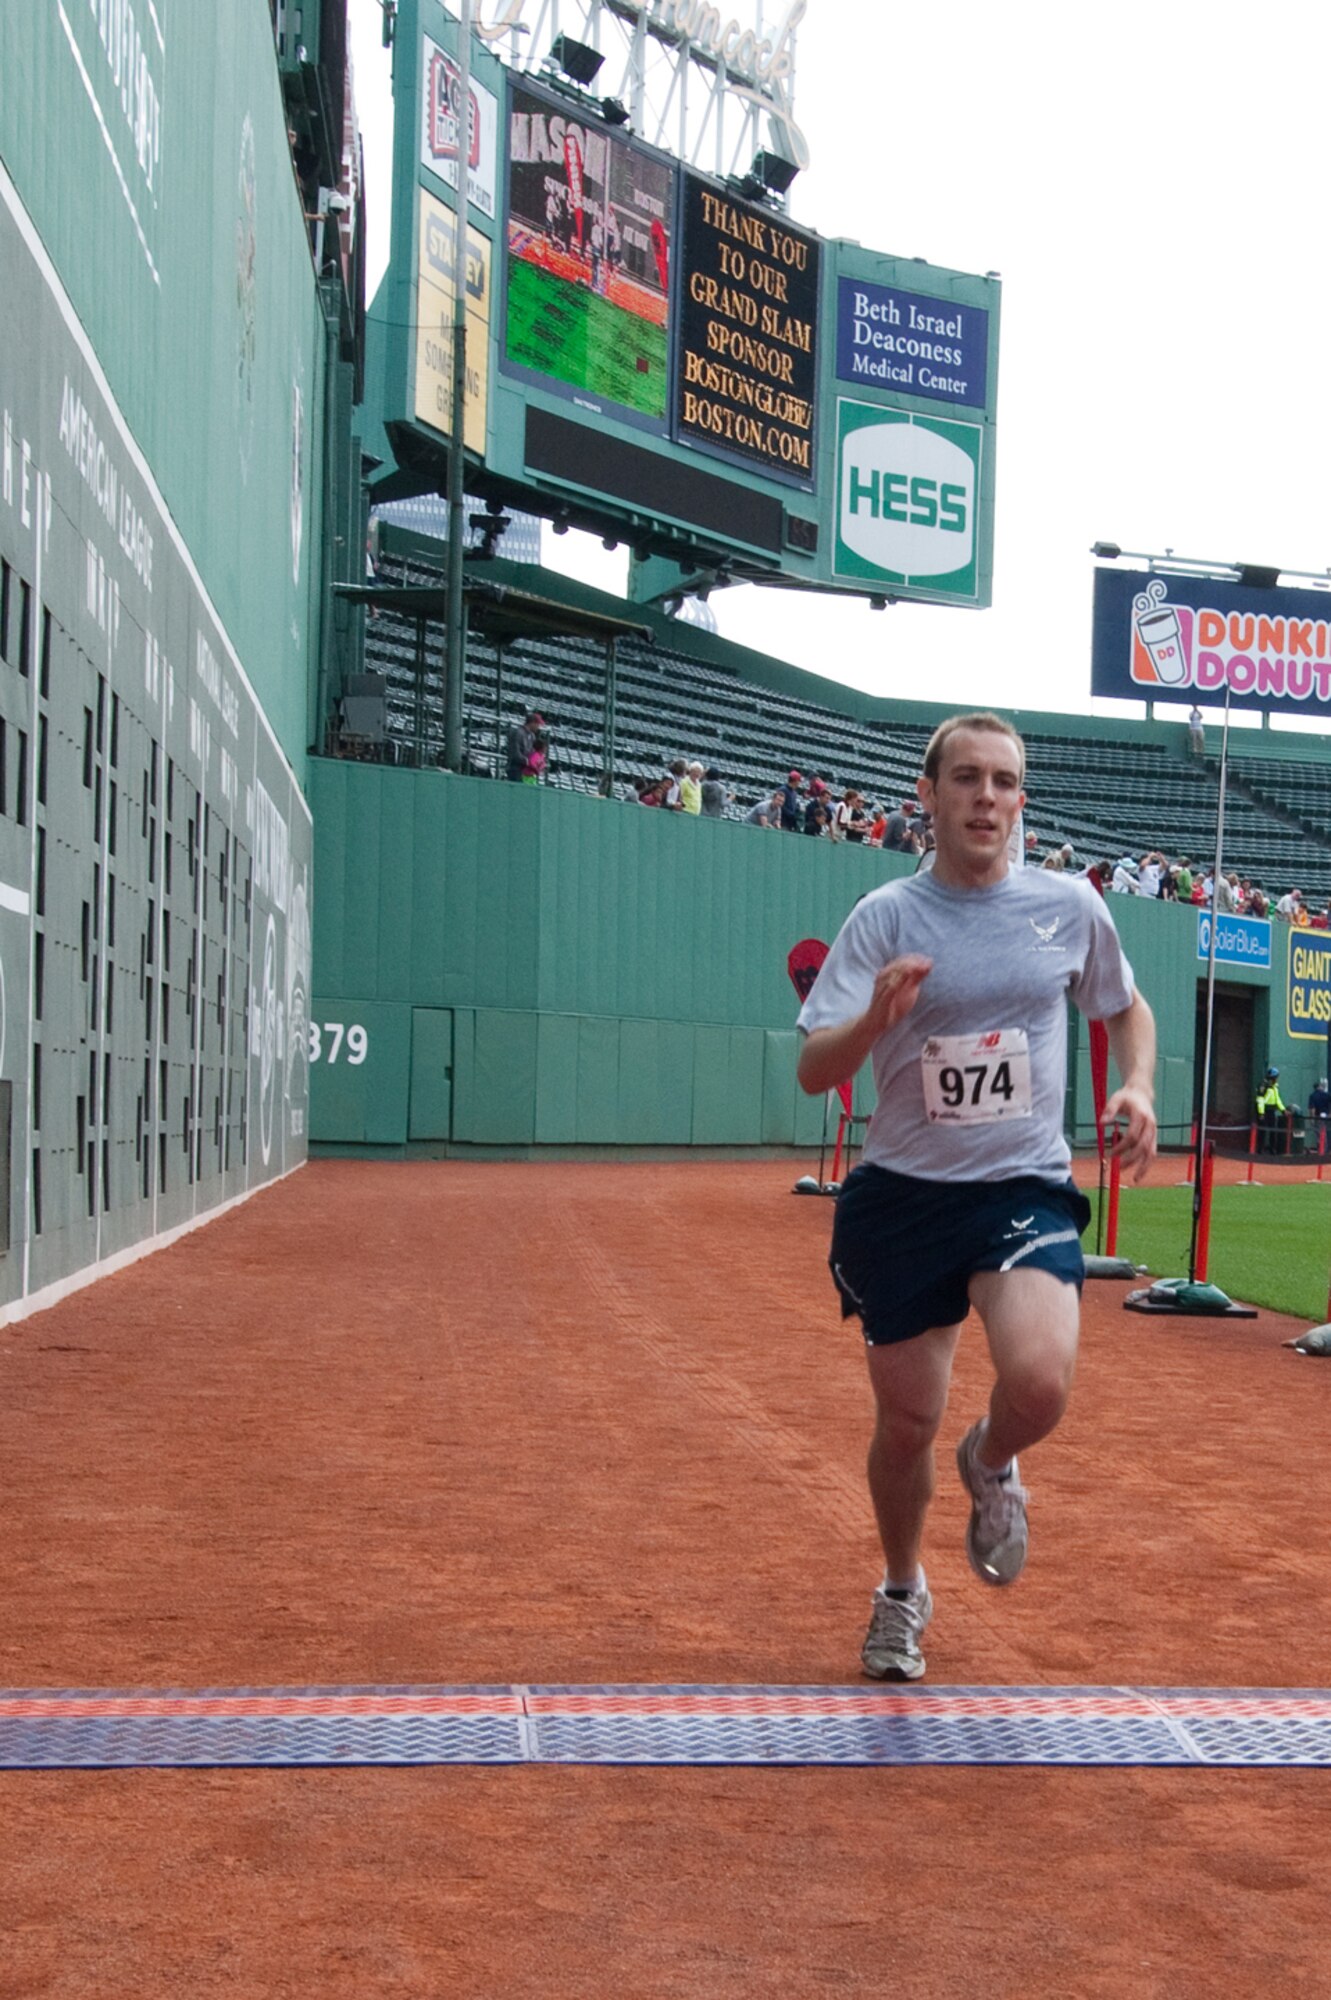 BOSTON – 1st Lt. Ronald Jenkins, 350th Electronic Systems Group, crosses the finish line near home plate at Fenway Park. Lieutenant Jenkins was the 14th finisher of more than 2,000 runners.  He finished the race with a time of 35:13. The race began at Fenway Park, crossed the Massachusetts Avenue Bridge, wound along the Charles River and returned over the bridge and into the ballpark, finishing at home plate.  Friends and supporters were invited into the park to watch their runner finish the race.  (U.S. Air Force photo by Rick Berry)